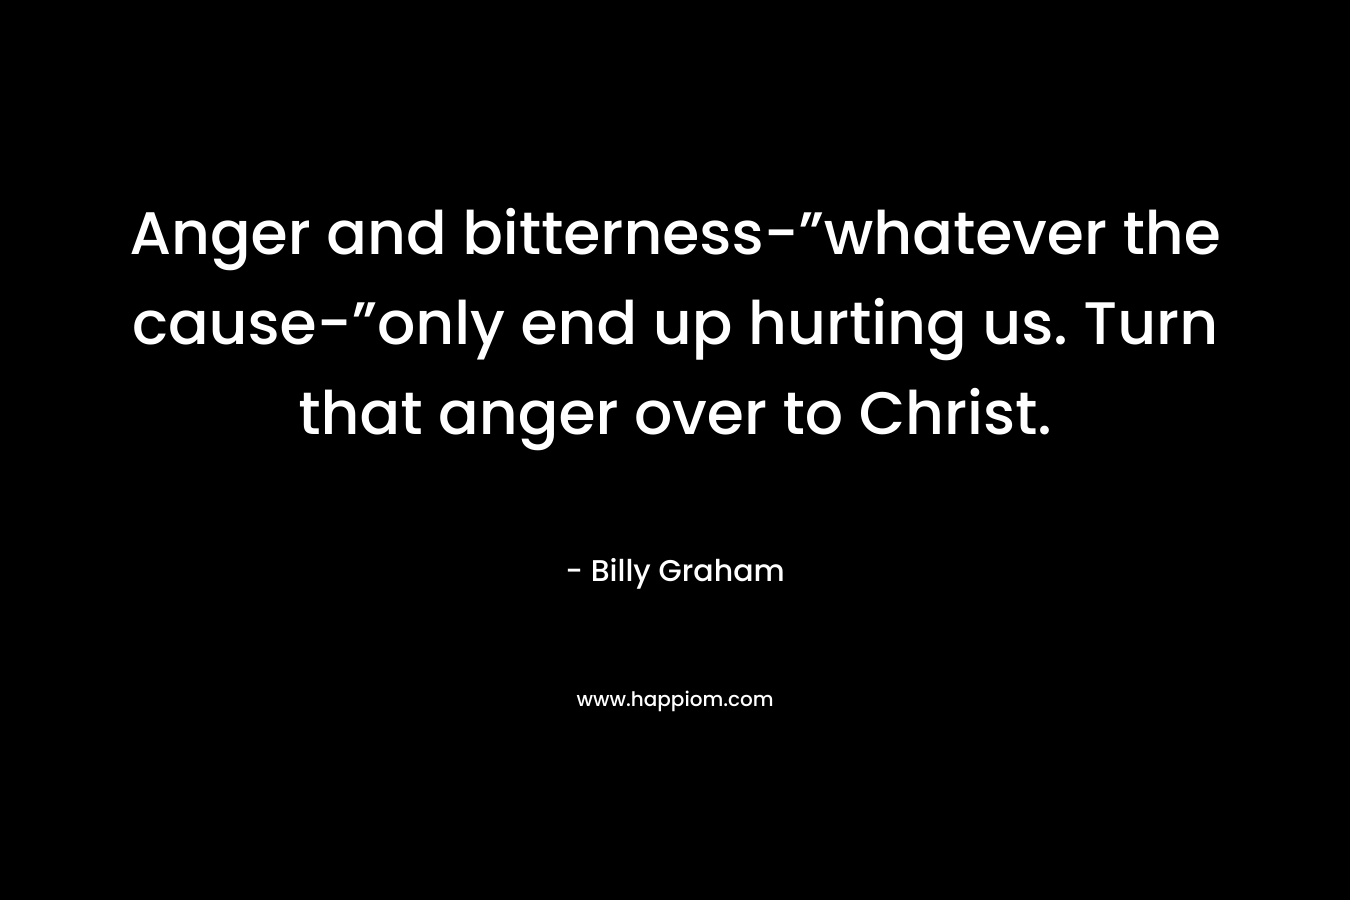 Anger and bitterness-”whatever the cause-”only end up hurting us. Turn that anger over to Christ.